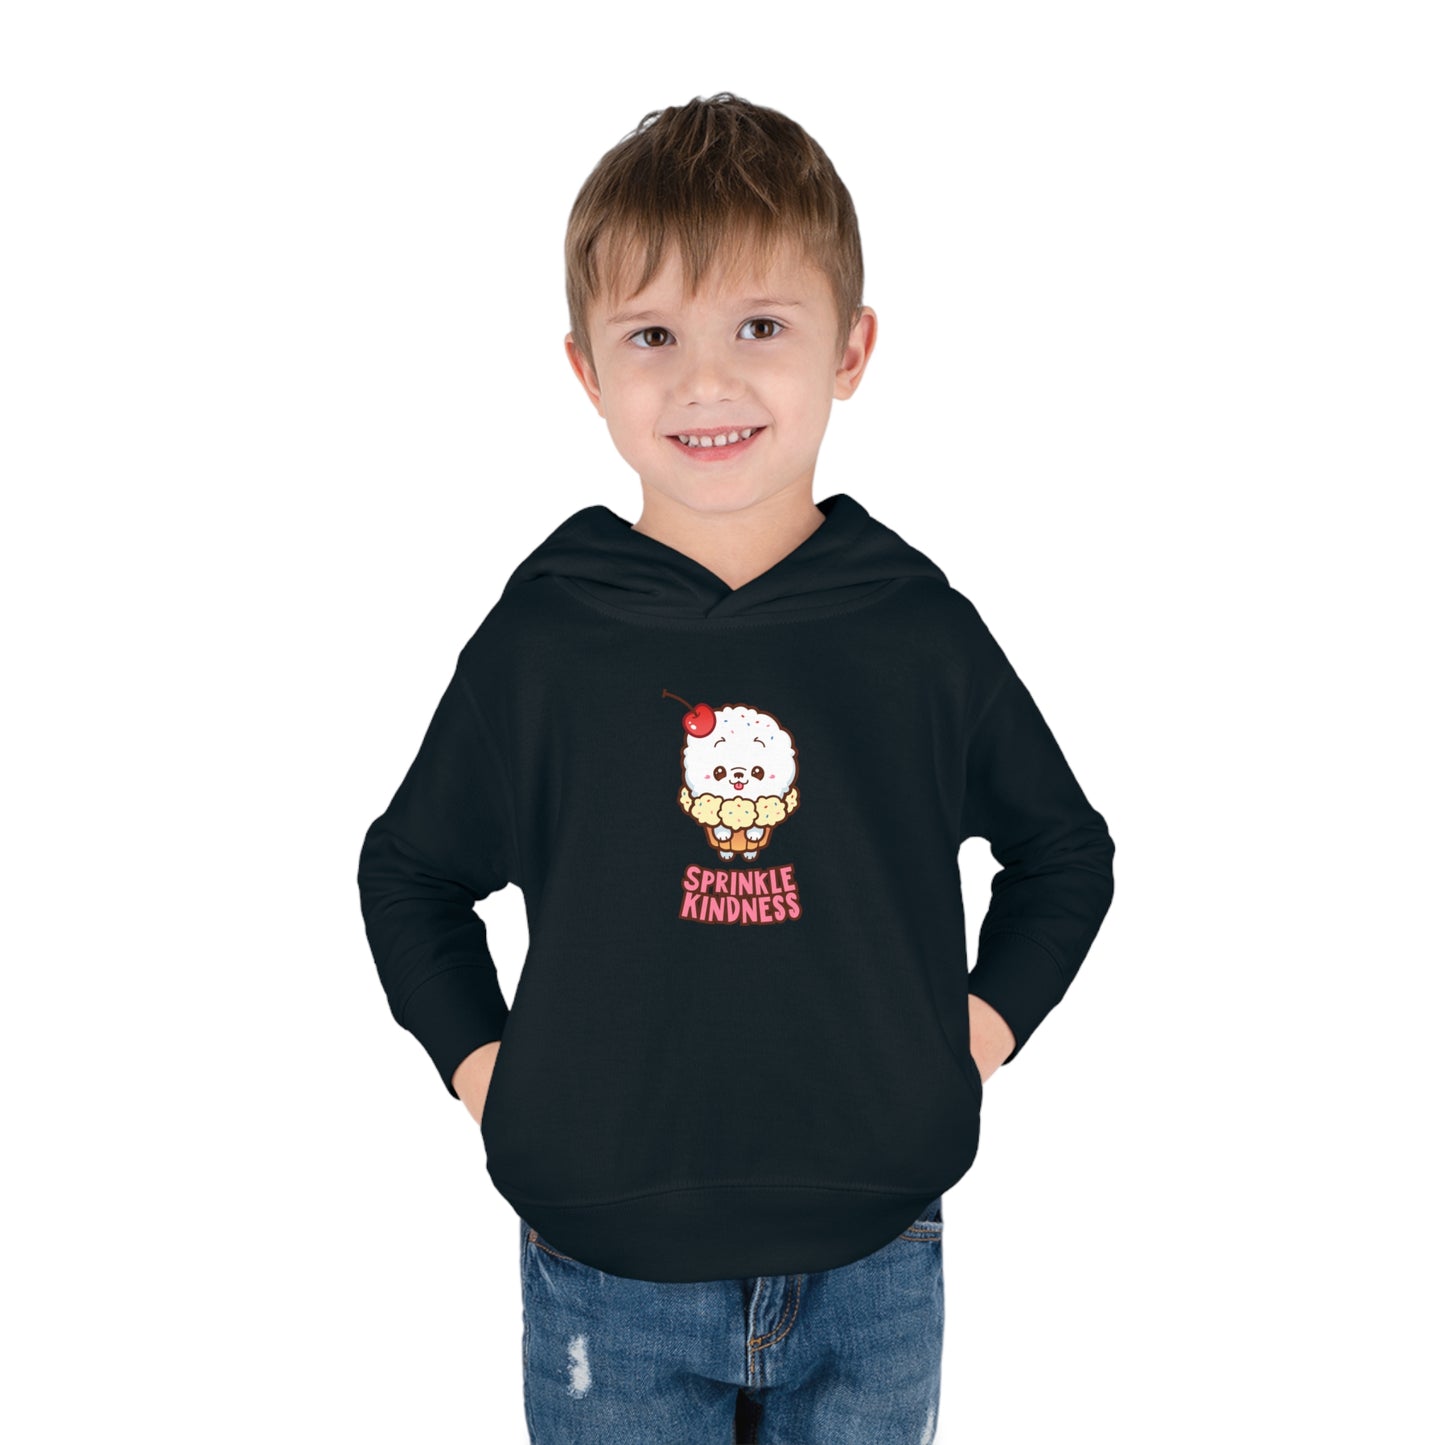 Sprinkle Kindness Toddler Pullover Fleece Hoodie, Pink Shirt Day Sweatshirt, Anti-Bullying Apparel For Kids